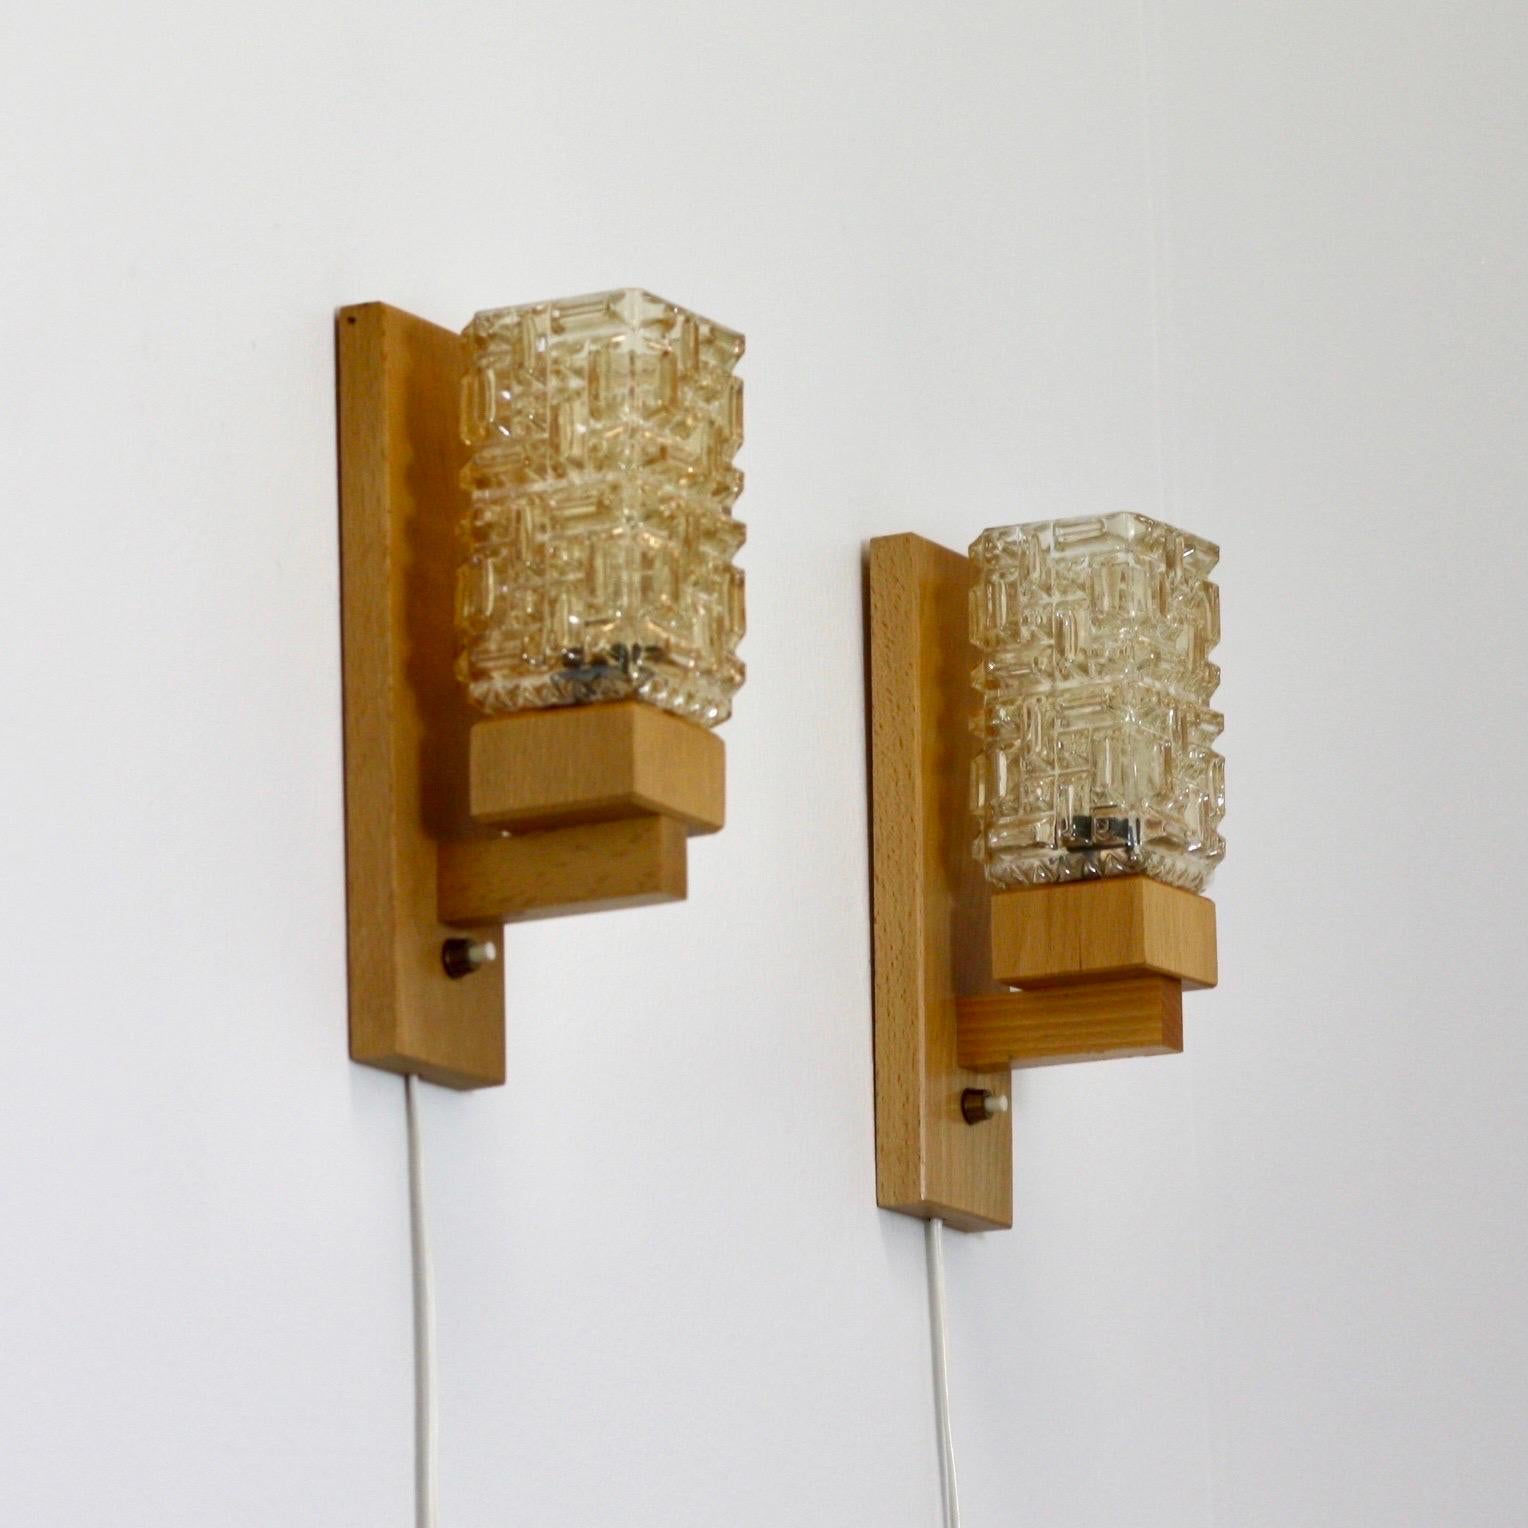 Wonderful set of Danish Modern wall lamps in Scandinavian beech wood and amber colored glass shades. The lamps were made in the 1970s by the small Danish workshop 'Vitrika'. 

* A set (2) beech wood wall lamps with amber glass shades
* Manufacturer: